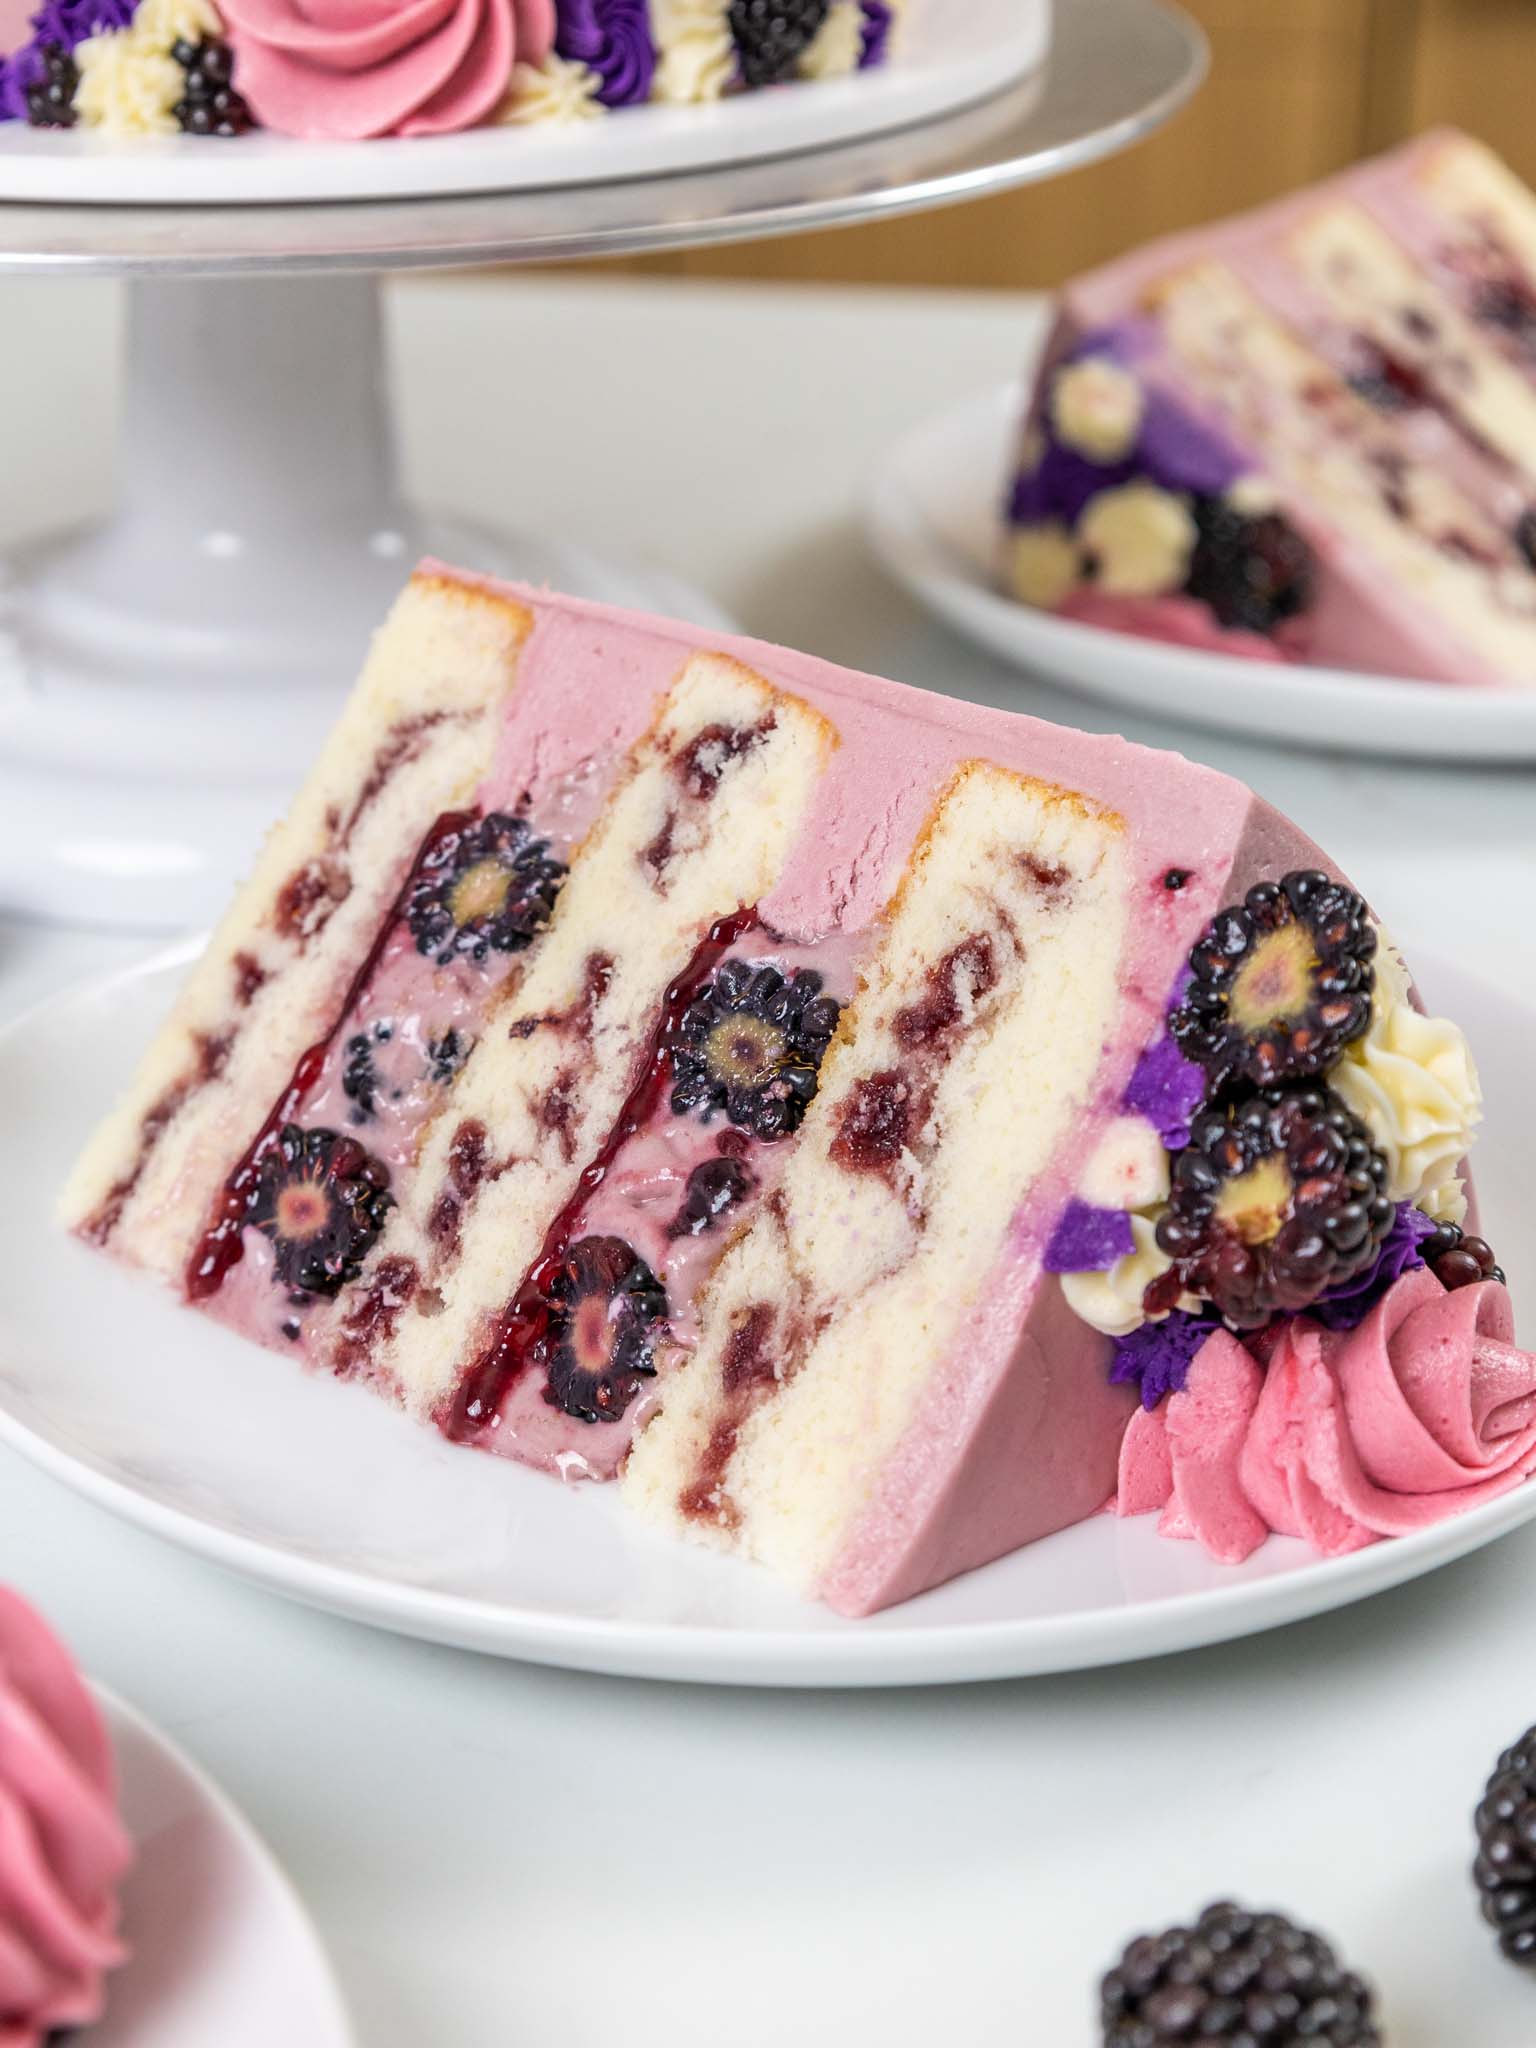 image of a blackberry mousse cake that's been cut and a slice has been plated showing it's delicious filling